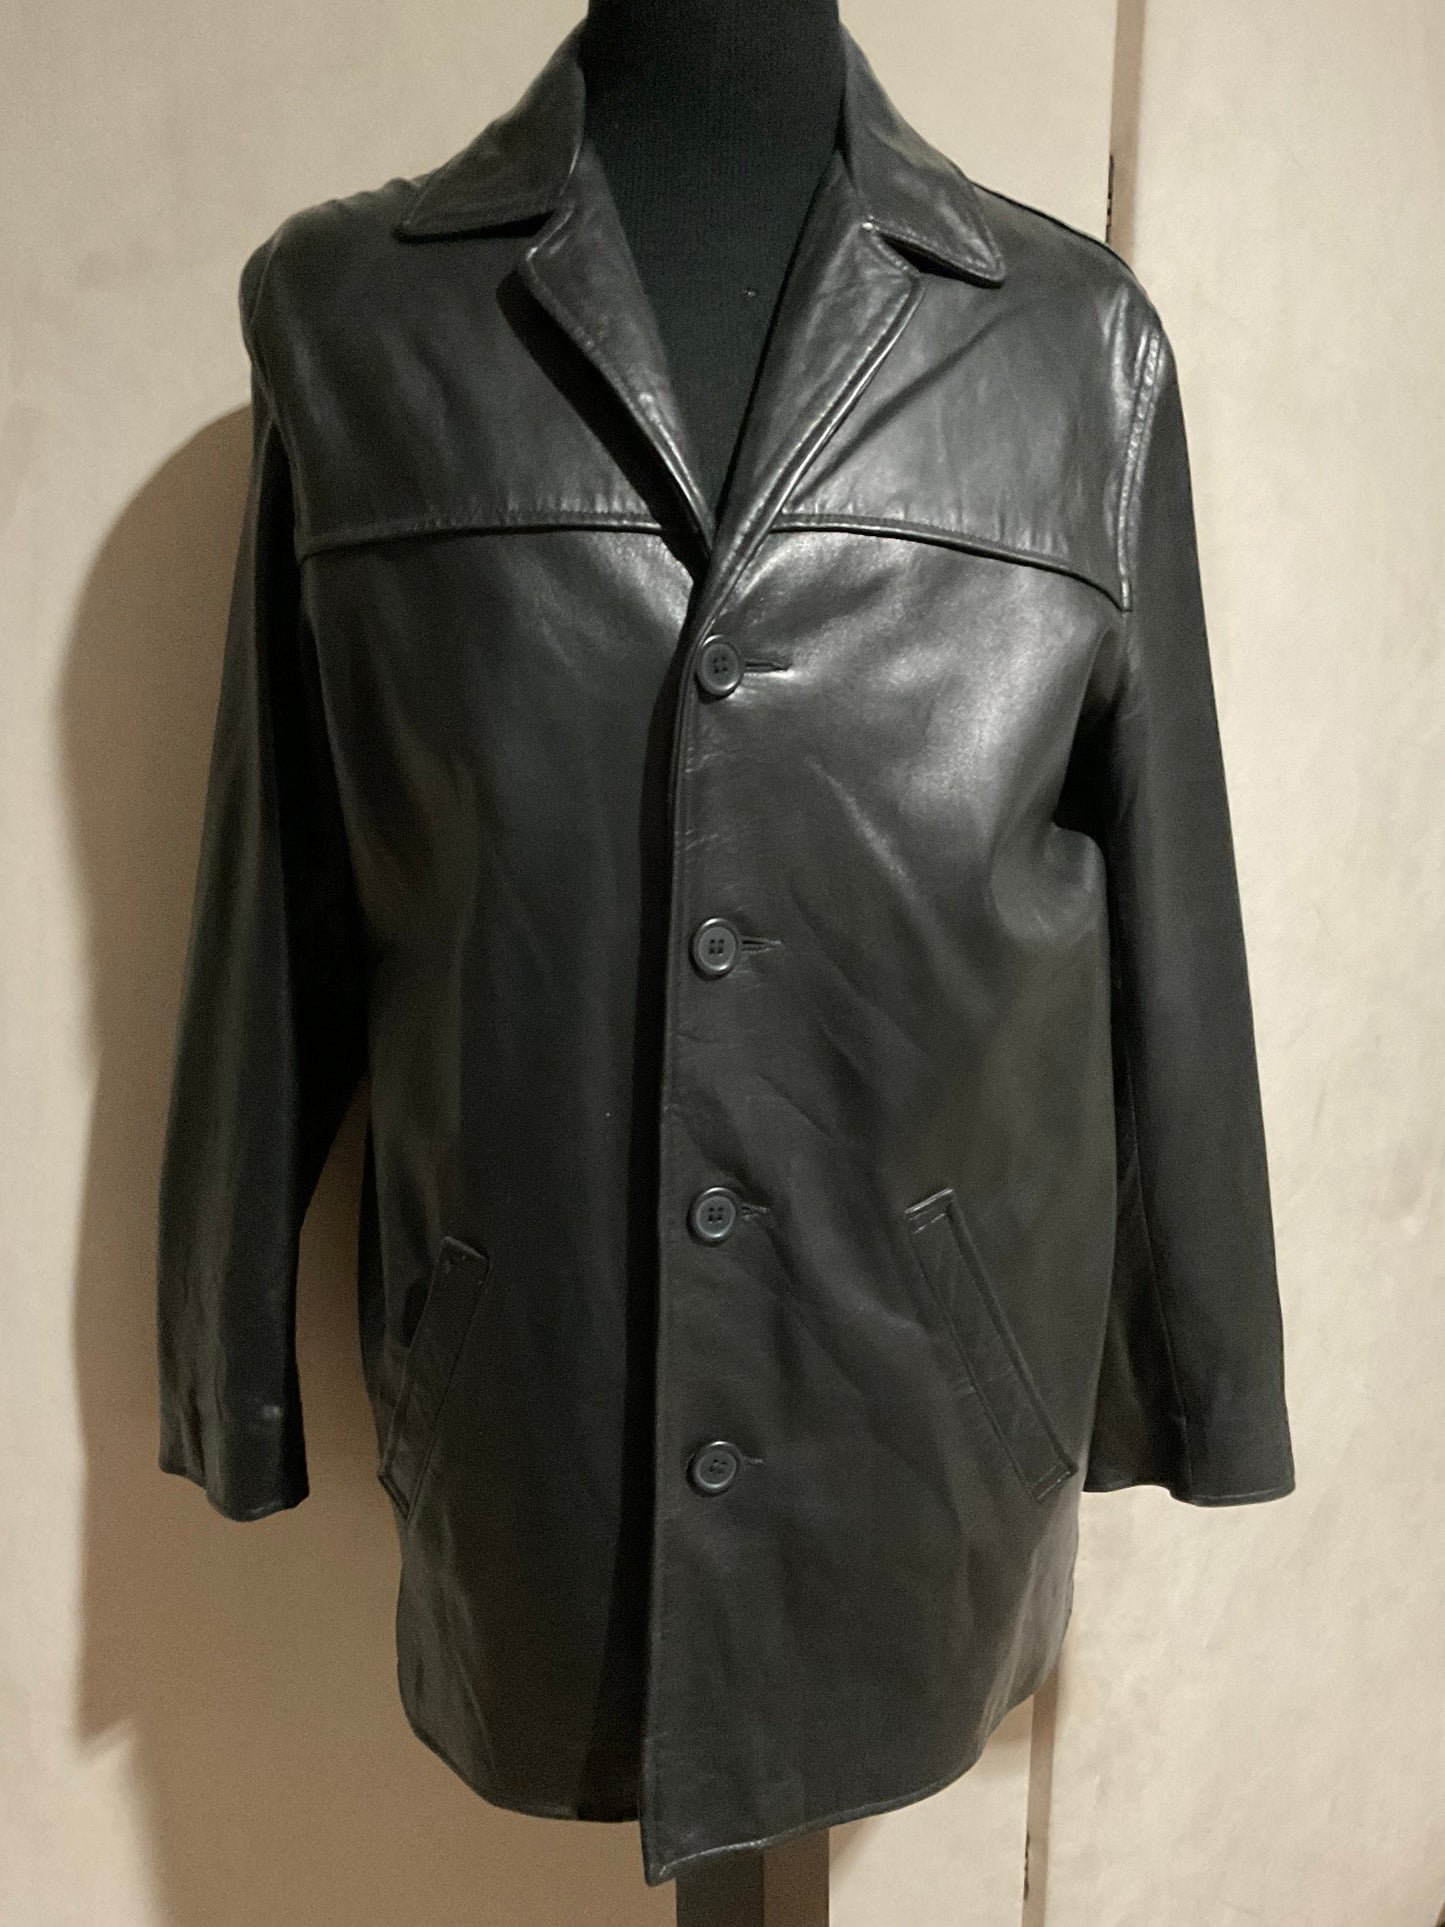 R P LEATHER JACKET / MEDIUM / BLACK / CRAFTED IN USA